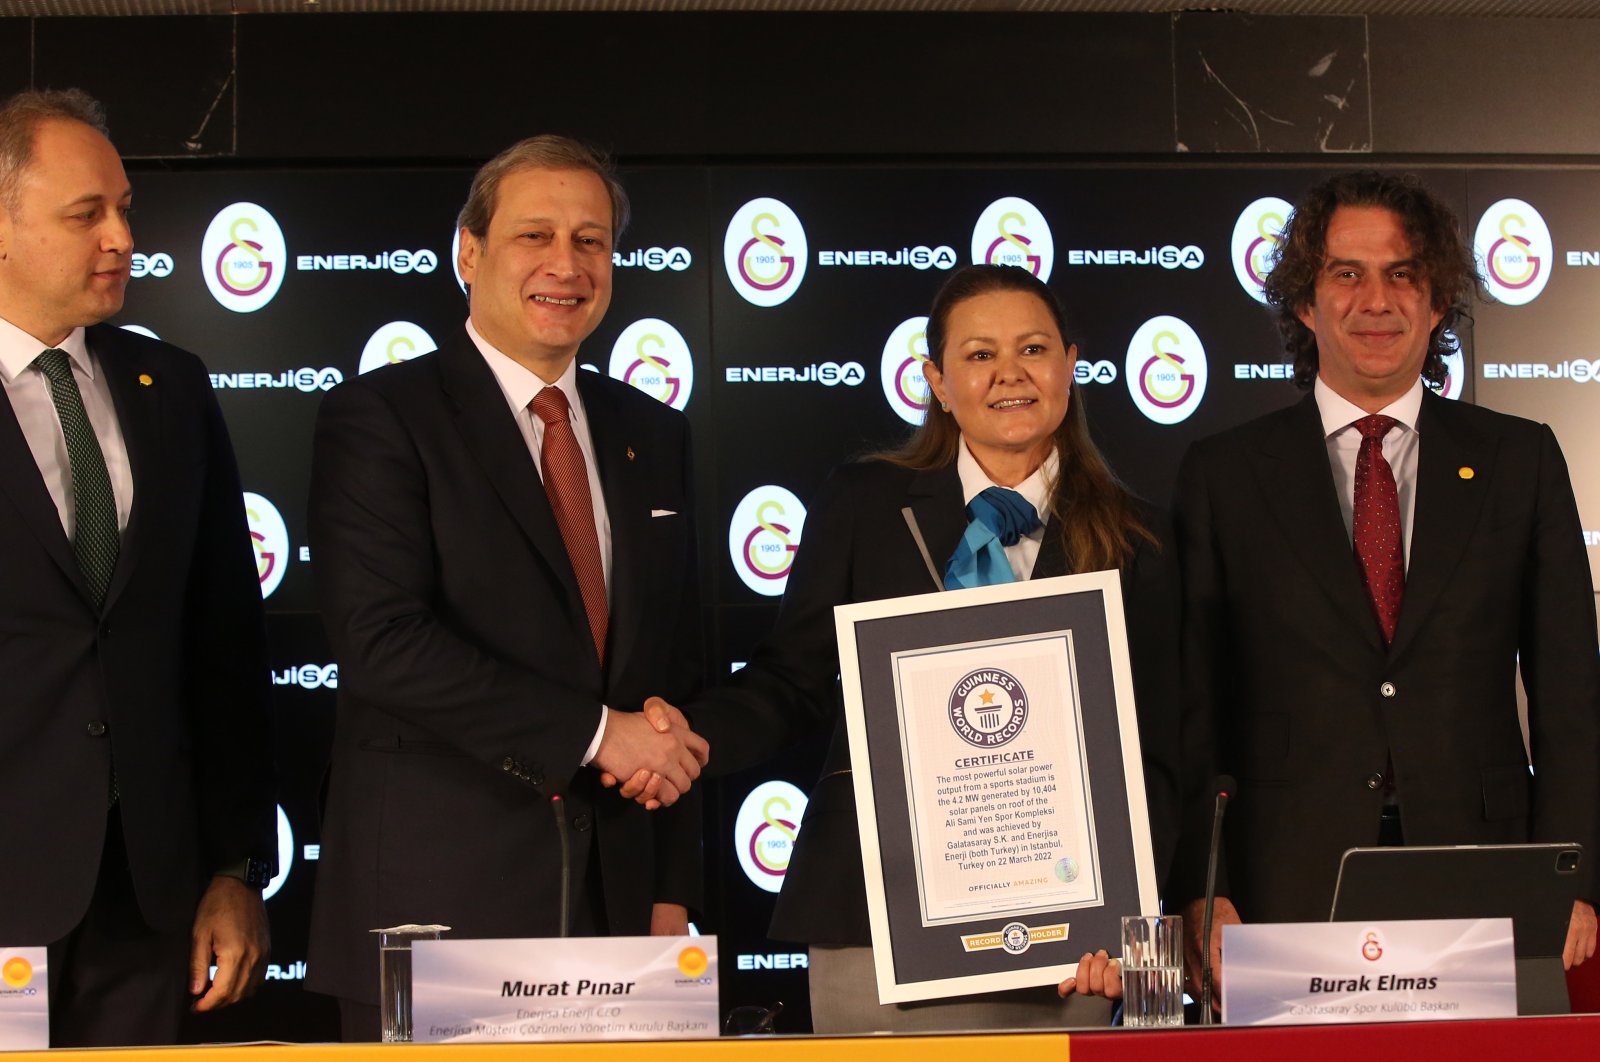 Officials from Galatasaray Sports Club and energy company Enerjisa attend a ceremony to mark the Guinness Book of World Records listing of the club&#039;s joint solar energy plant project, Istanbul, Turkey, March 22, 2022. (DHA Photo)